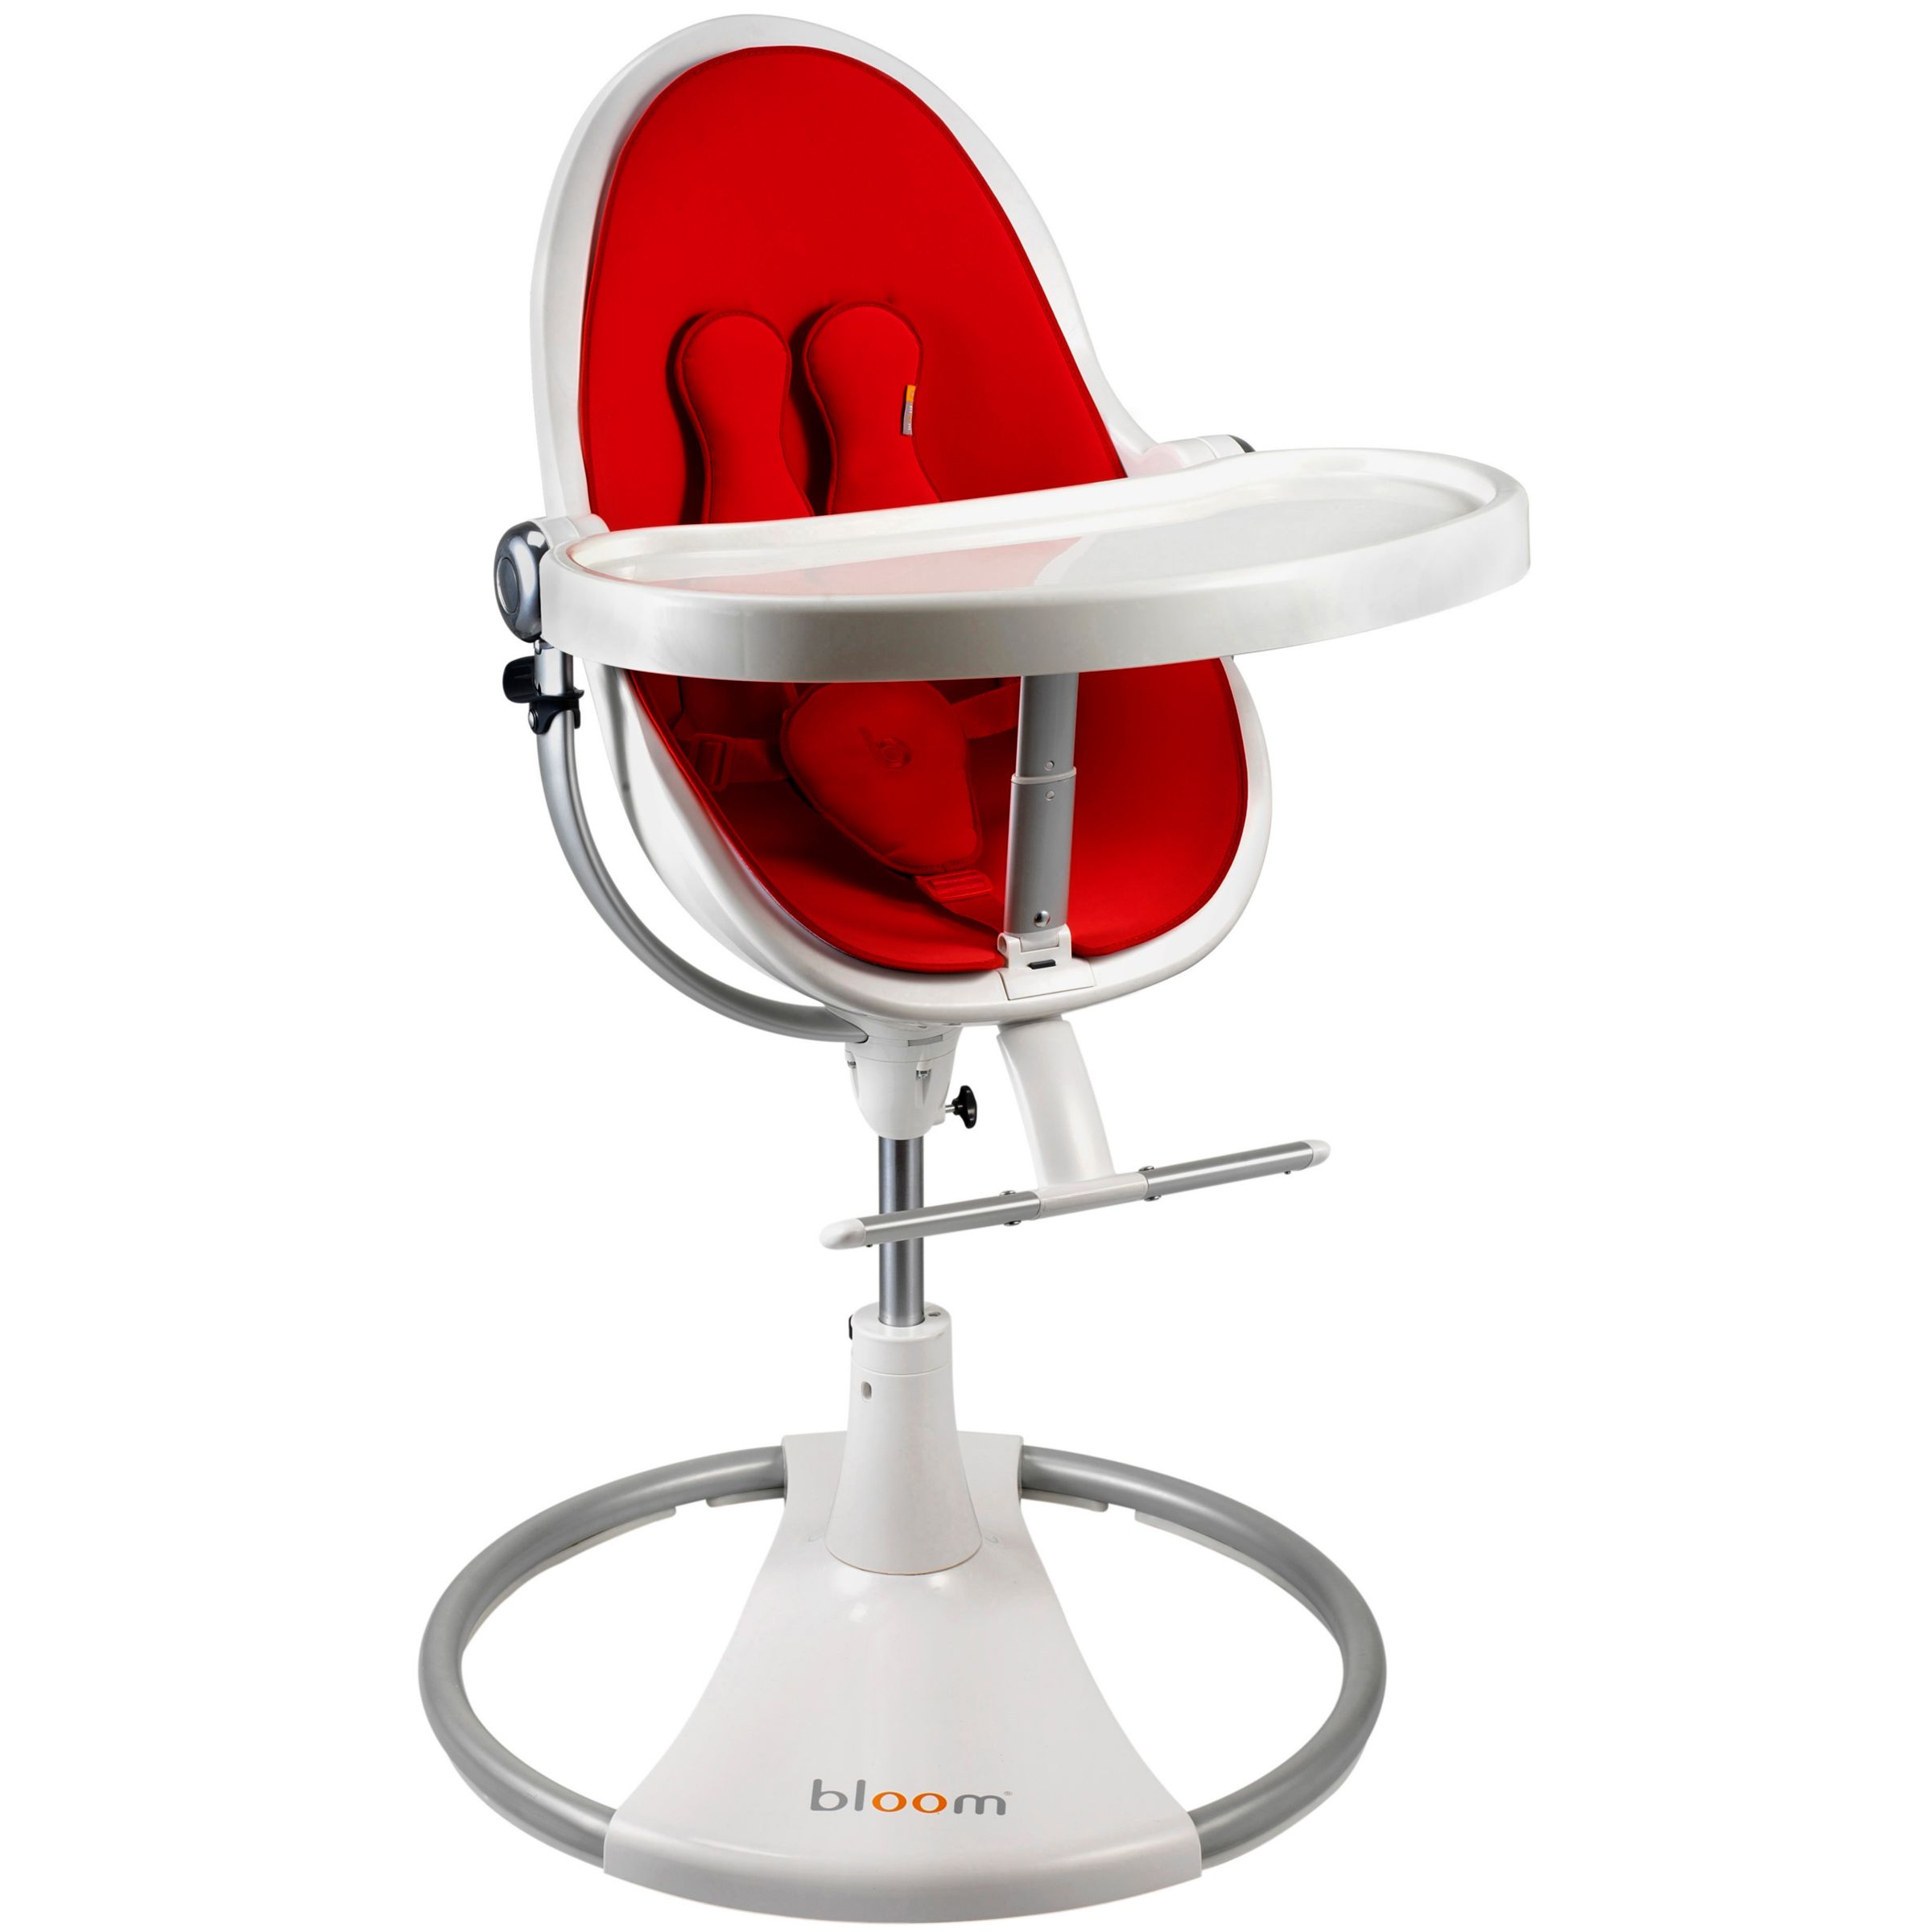 bloom Fresco Classic Contemporary Leatherette Baby Chair, Rock red at JohnLewis